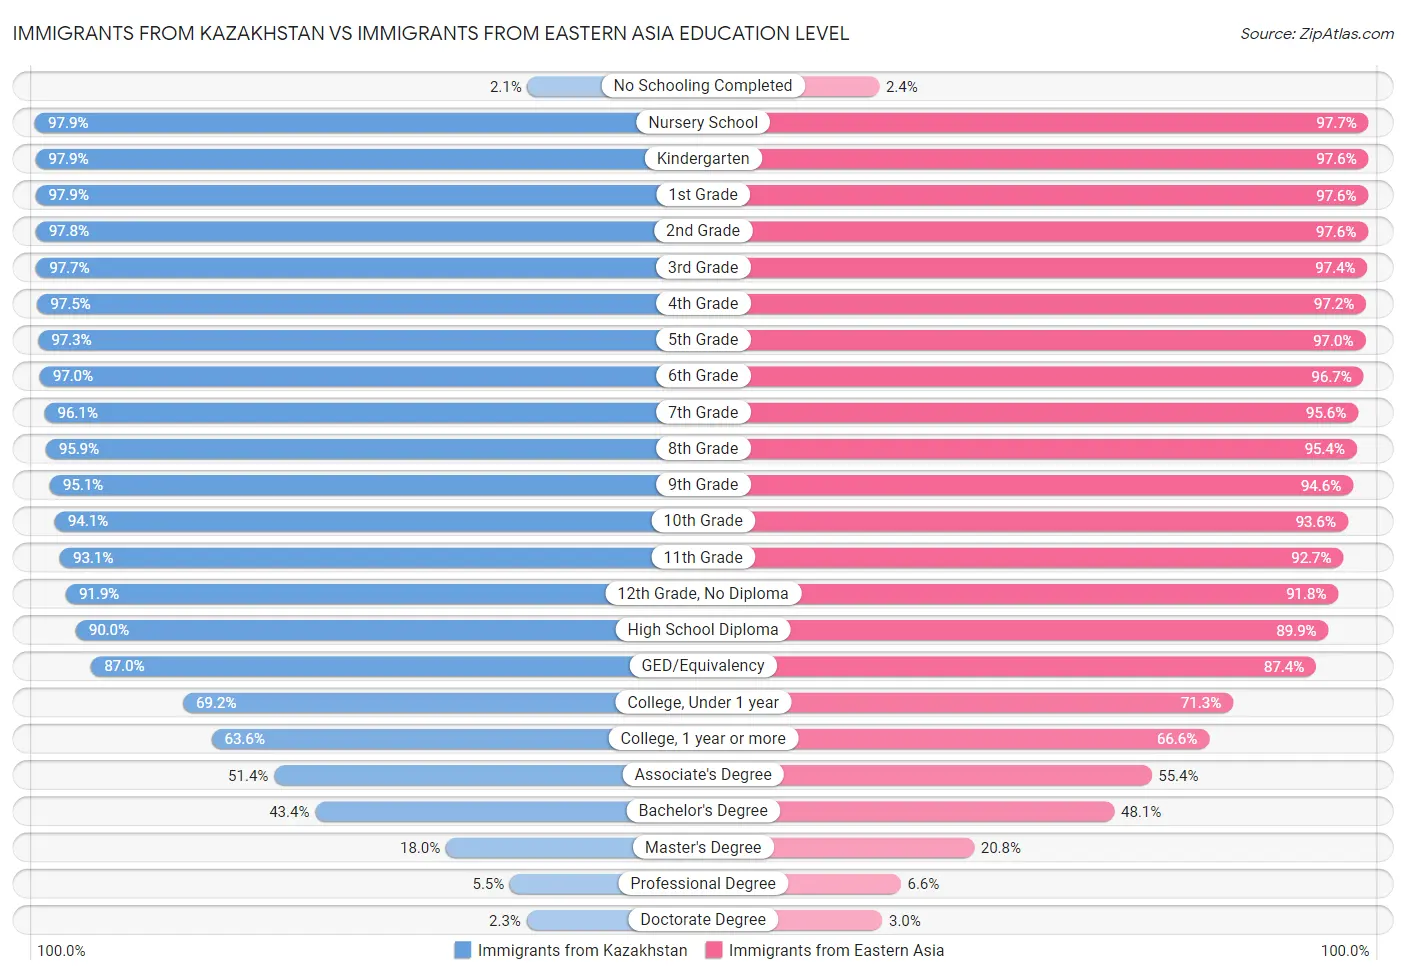 Immigrants from Kazakhstan vs Immigrants from Eastern Asia Education Level